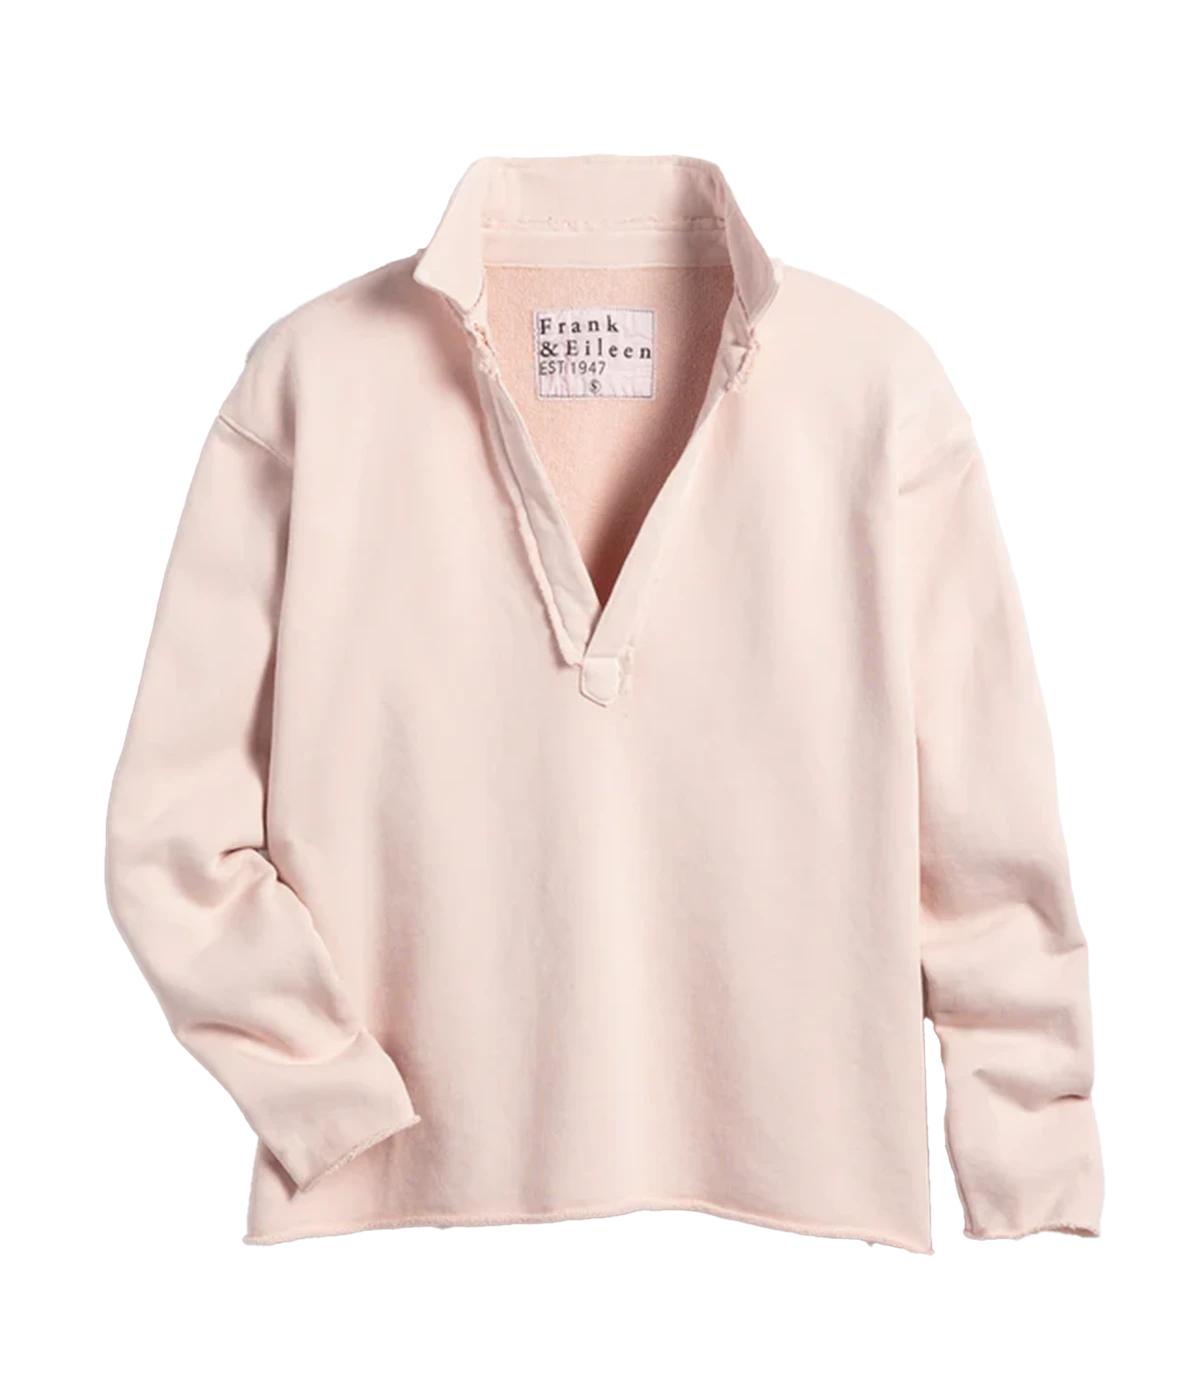 A light pink triple fleece sweatshirt with a raw hem and V neckline. Cropped without sacrificing coverage, you’ll love the sporty meets posh look of this bra friendly, wash and wear popover by Frank and Eileen. 